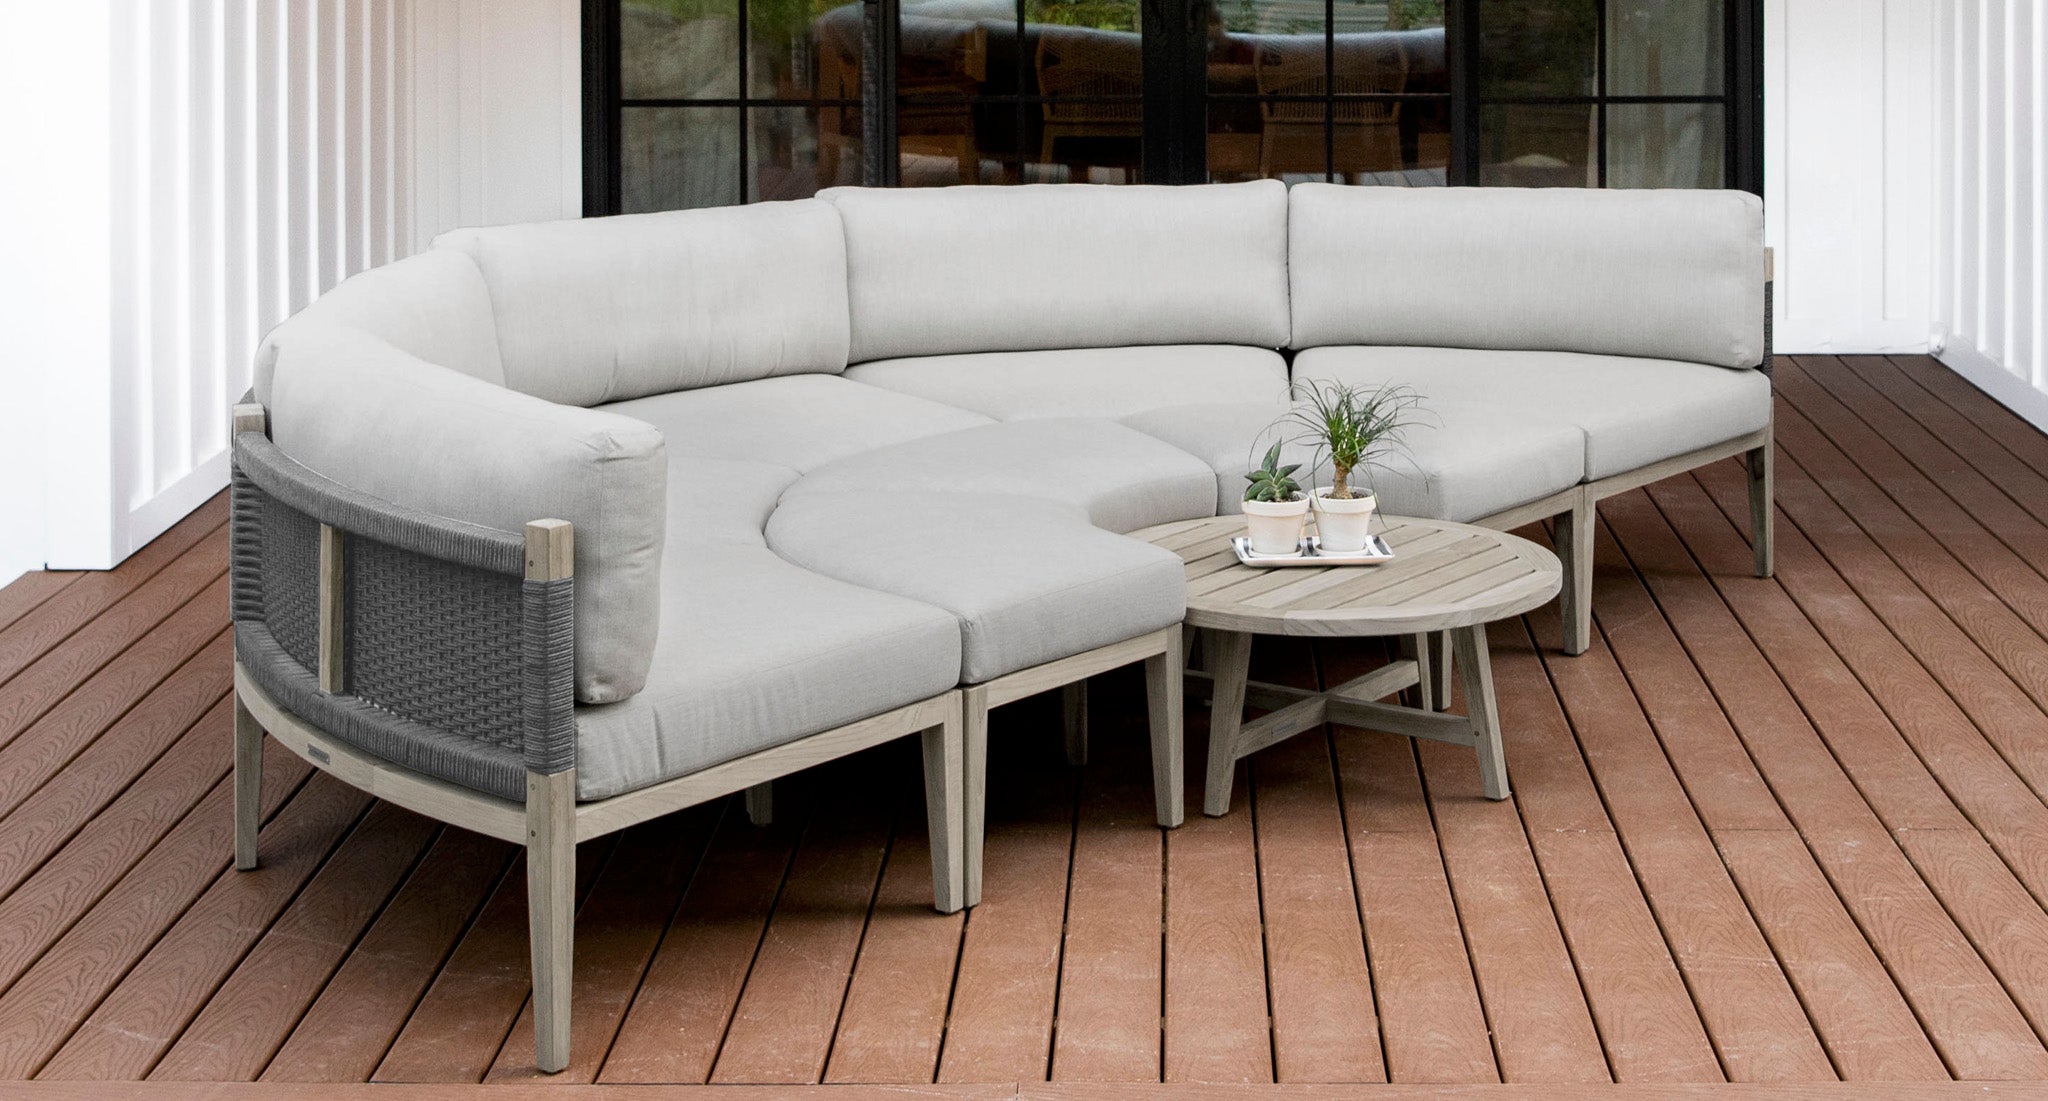 Designer Woven Rope Outdoor Contemporary Daybed - Juliettes Interiors